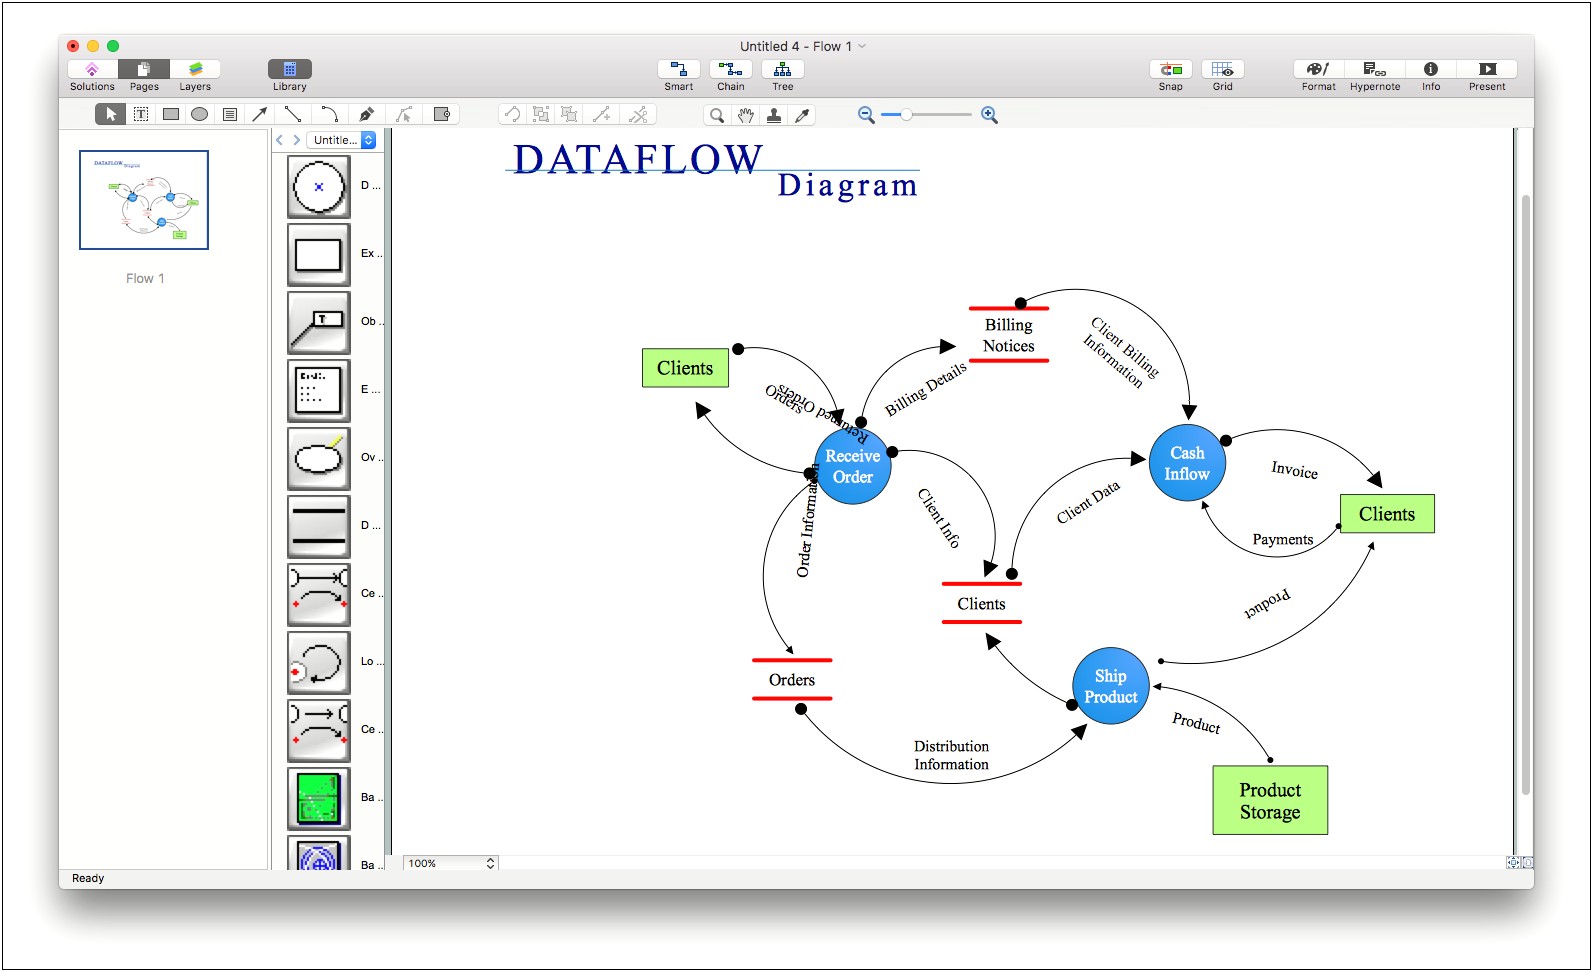 Visio 2010 Sequence Diagram Template Download